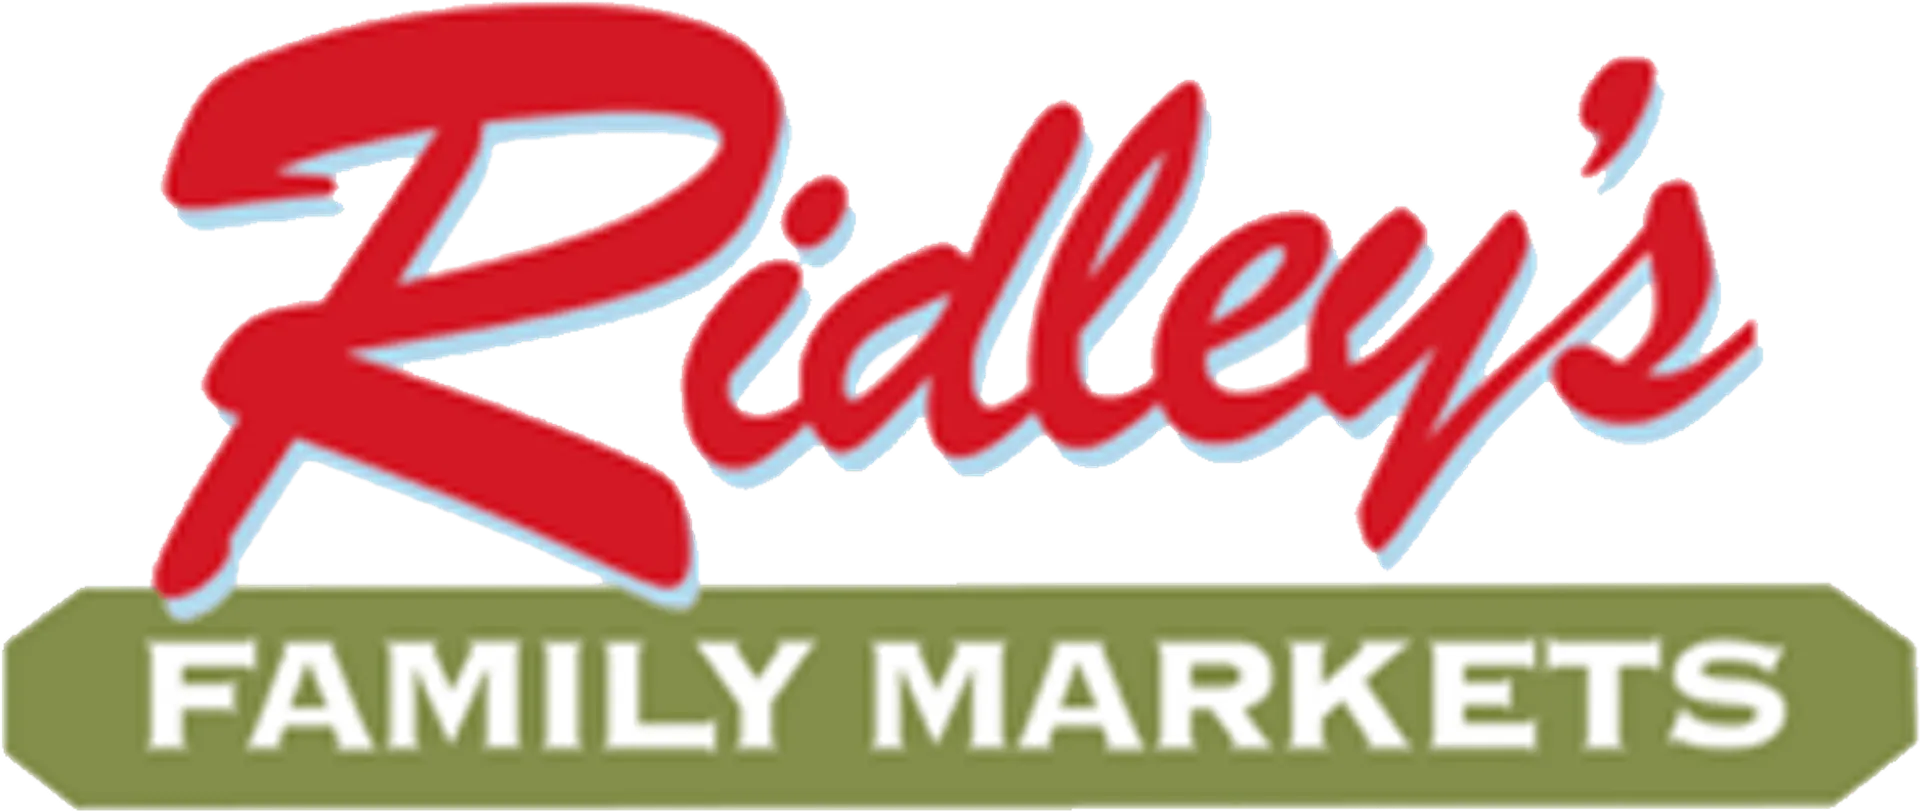 RIDLEY´S FAMILY MARKET logo current weekly ad